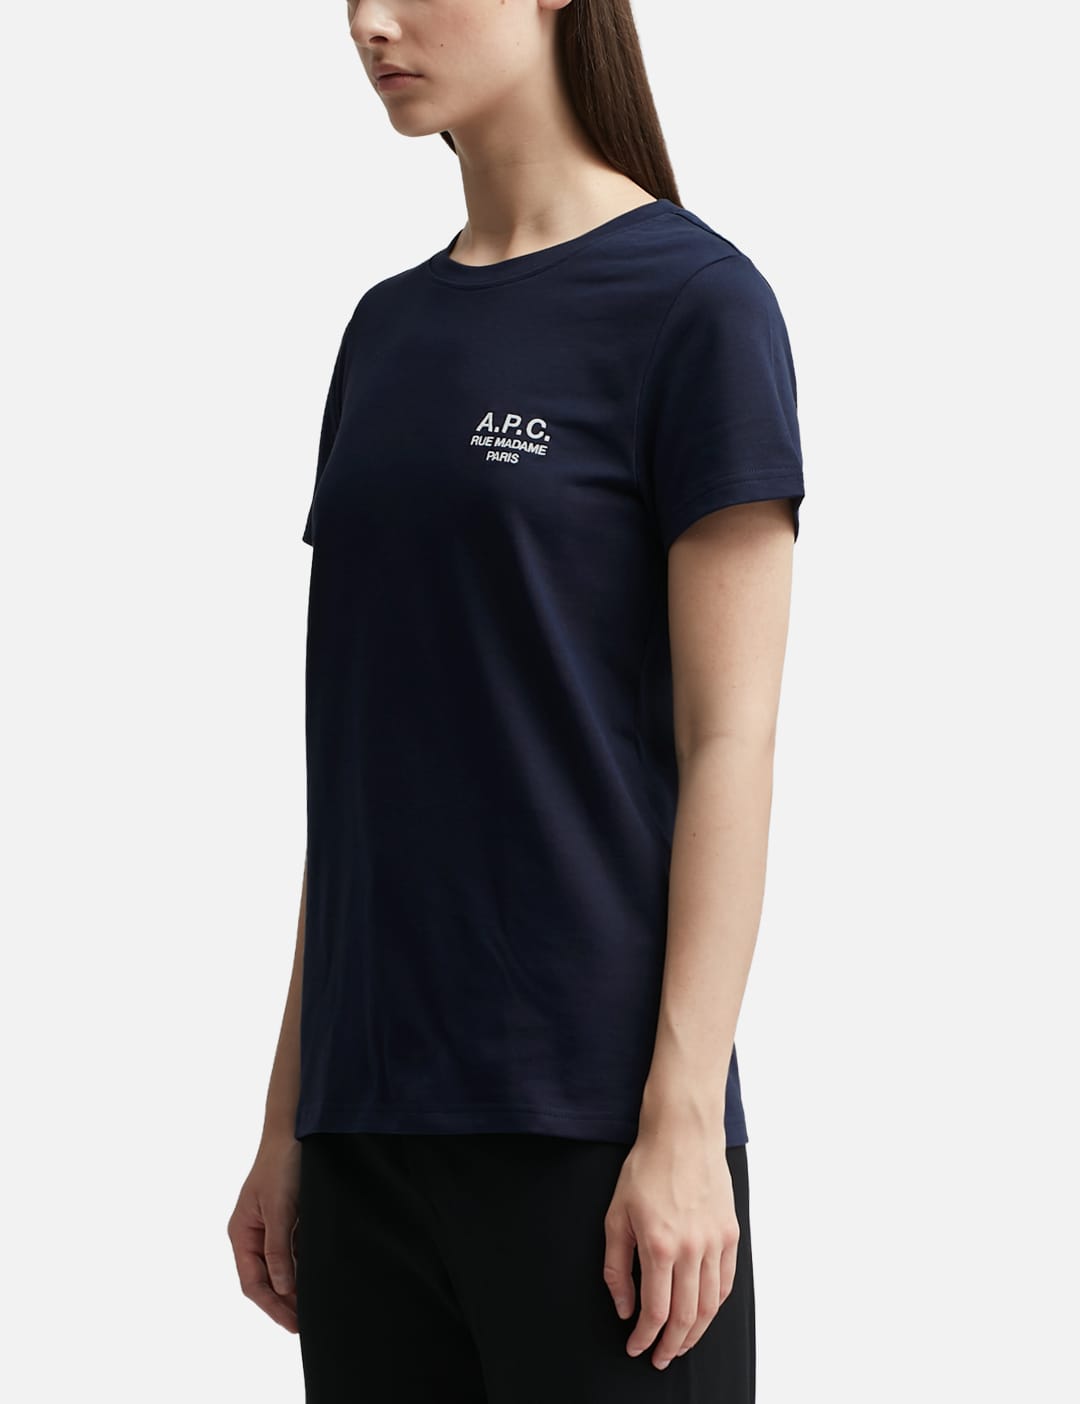 A.P.C. - Denise T-shirt | HBX - Globally Curated Fashion and